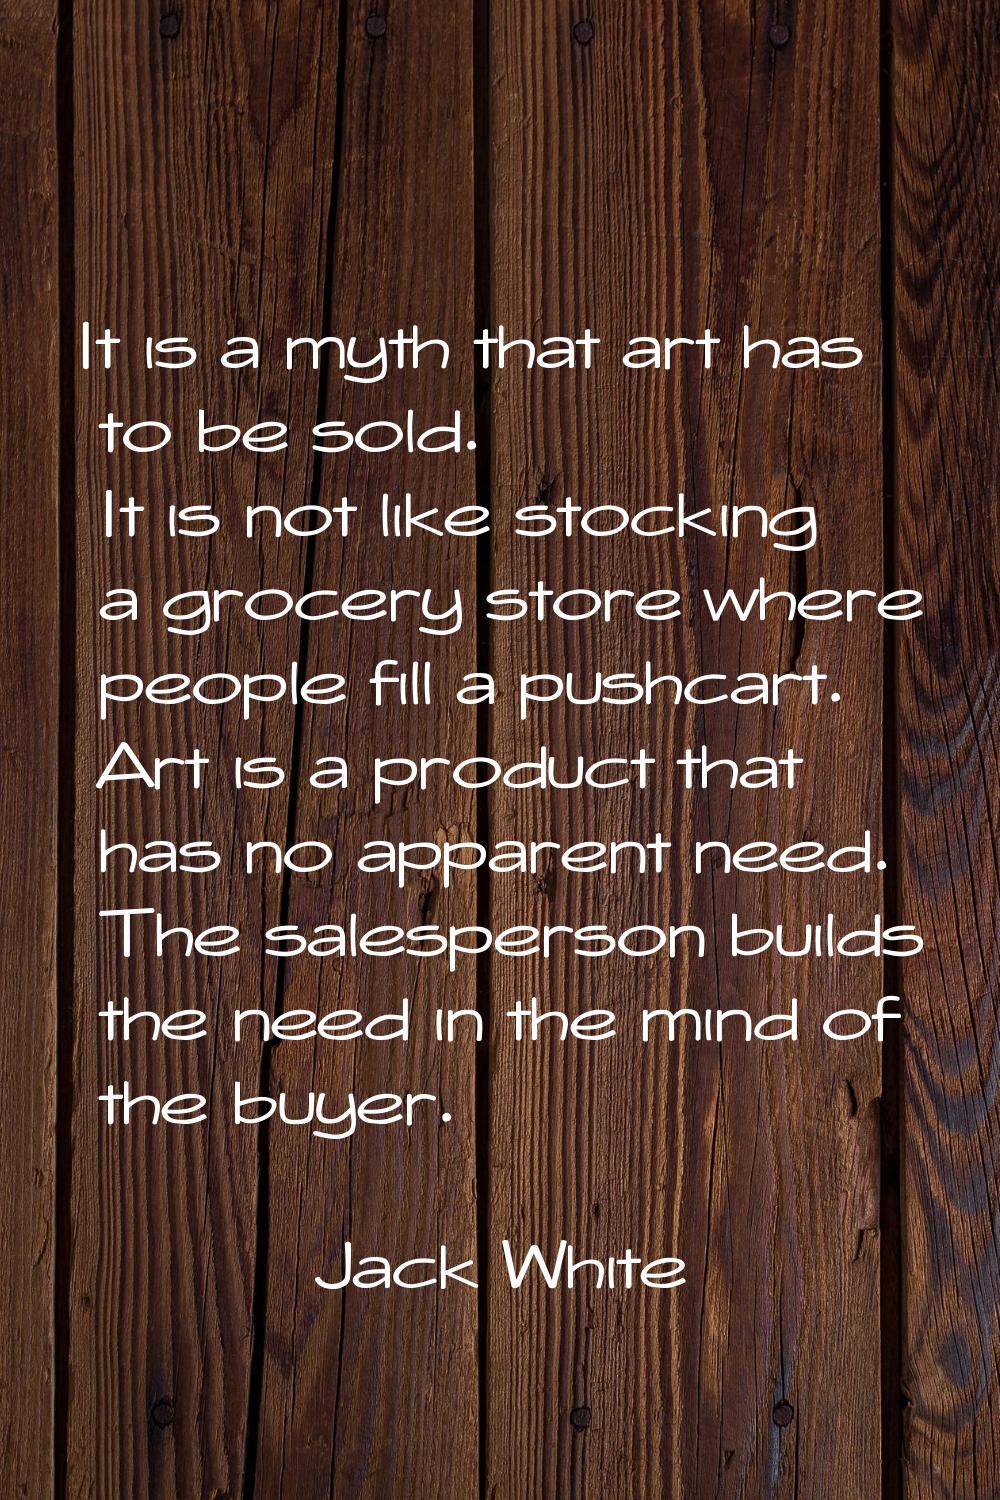 It is a myth that art has to be sold. It is not like stocking a grocery store where people fill a p